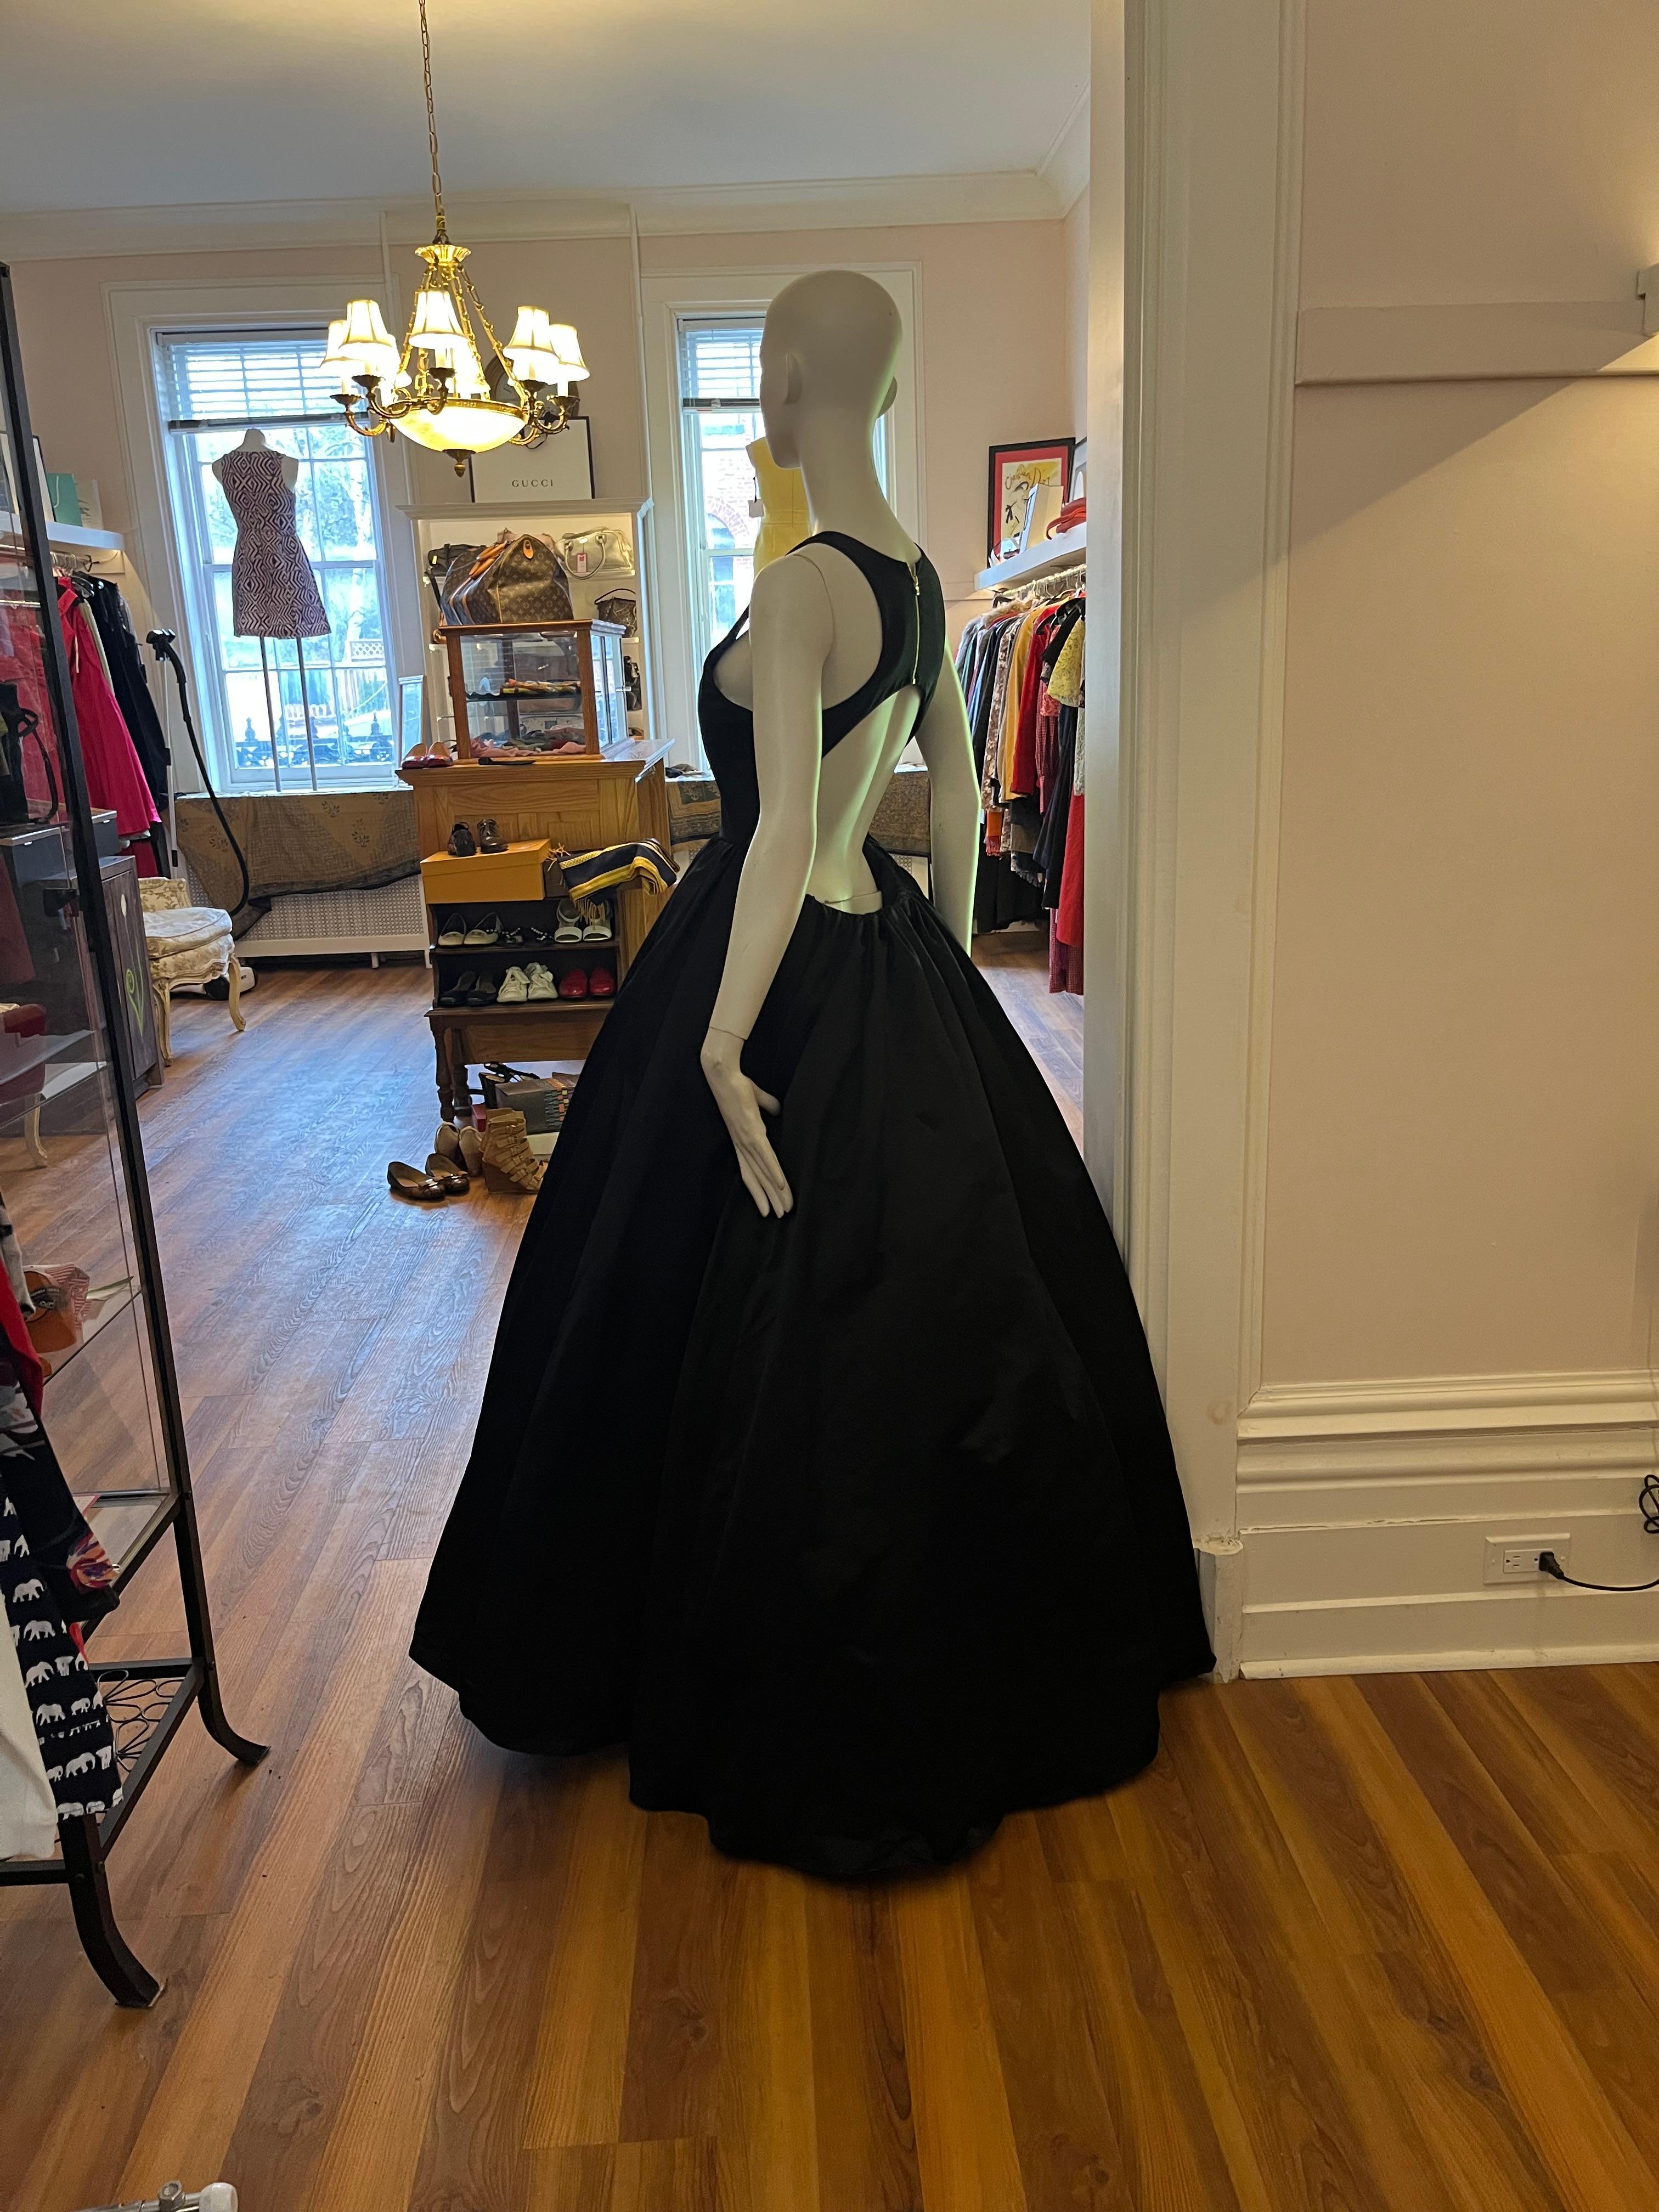 Be the belle of the ball! This is a fabulous black duchess satin scoop neck and open back gown. Nice wide zip detail at the back, and voluminous crinolines. The proportions are designed to feature you at your best.

This is the same model as the